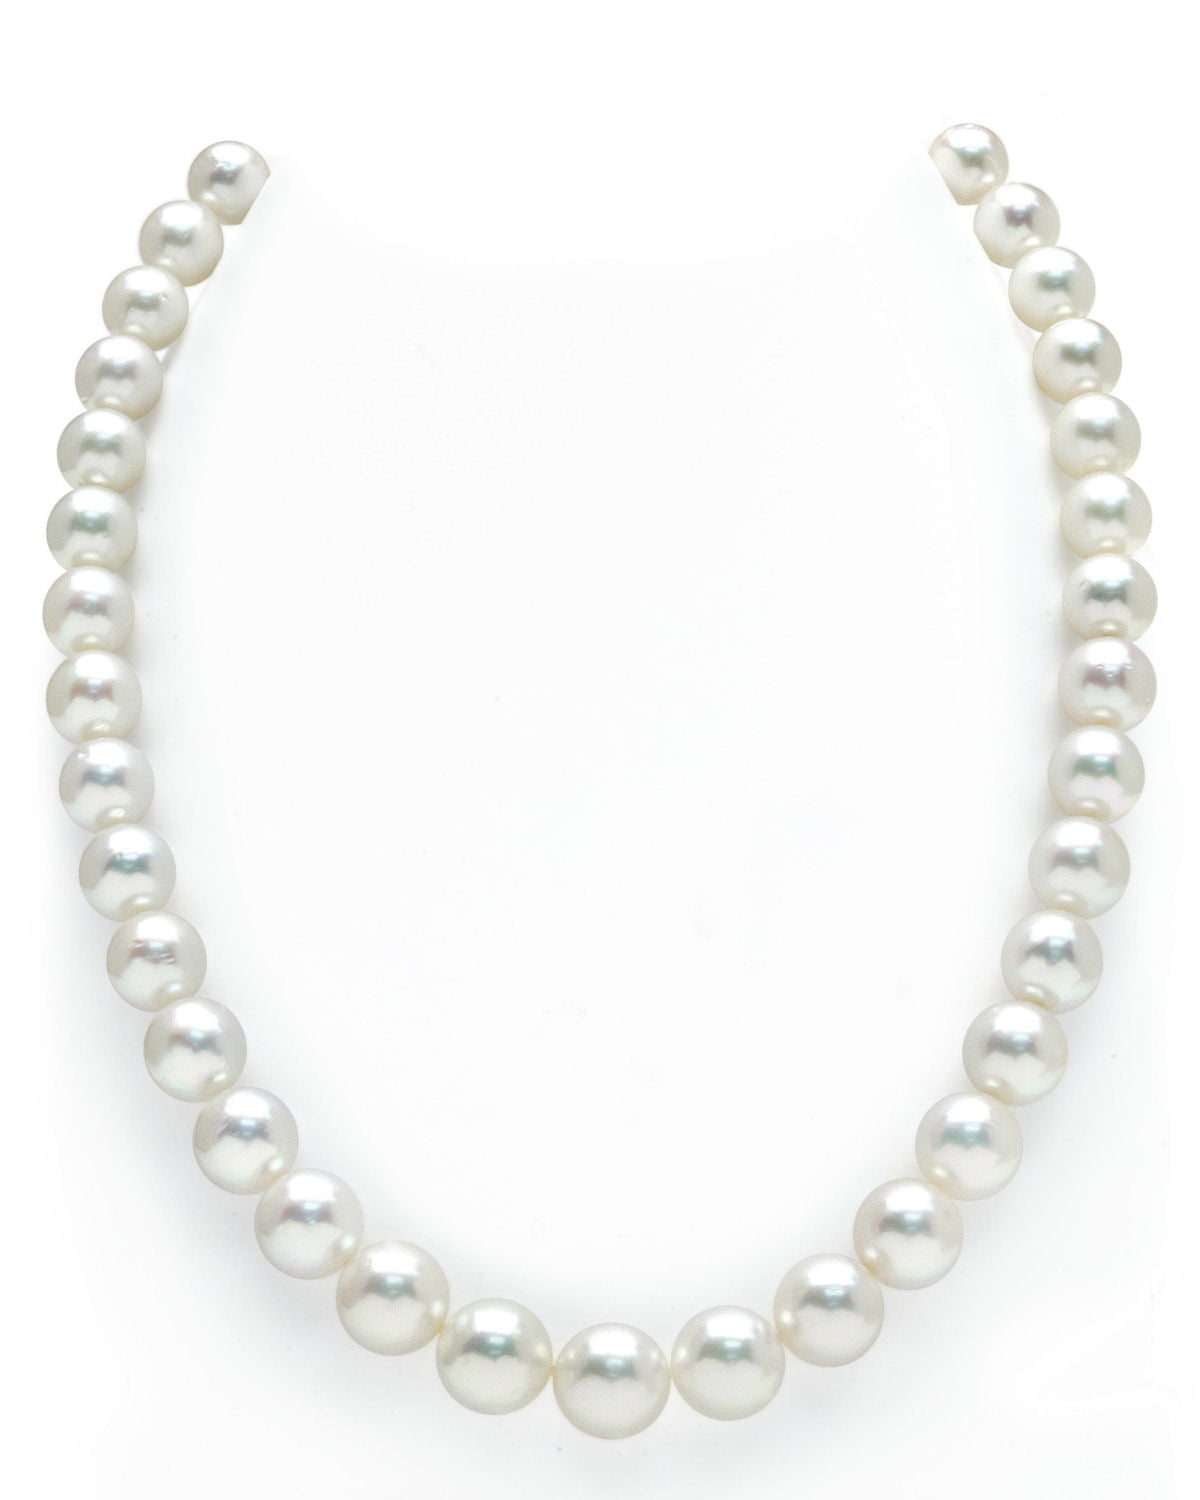 Details about   18 INCH Gorgeous White Grey AAA 8-9mm South Sea Pearl Necklace 14k Gold Clasp 